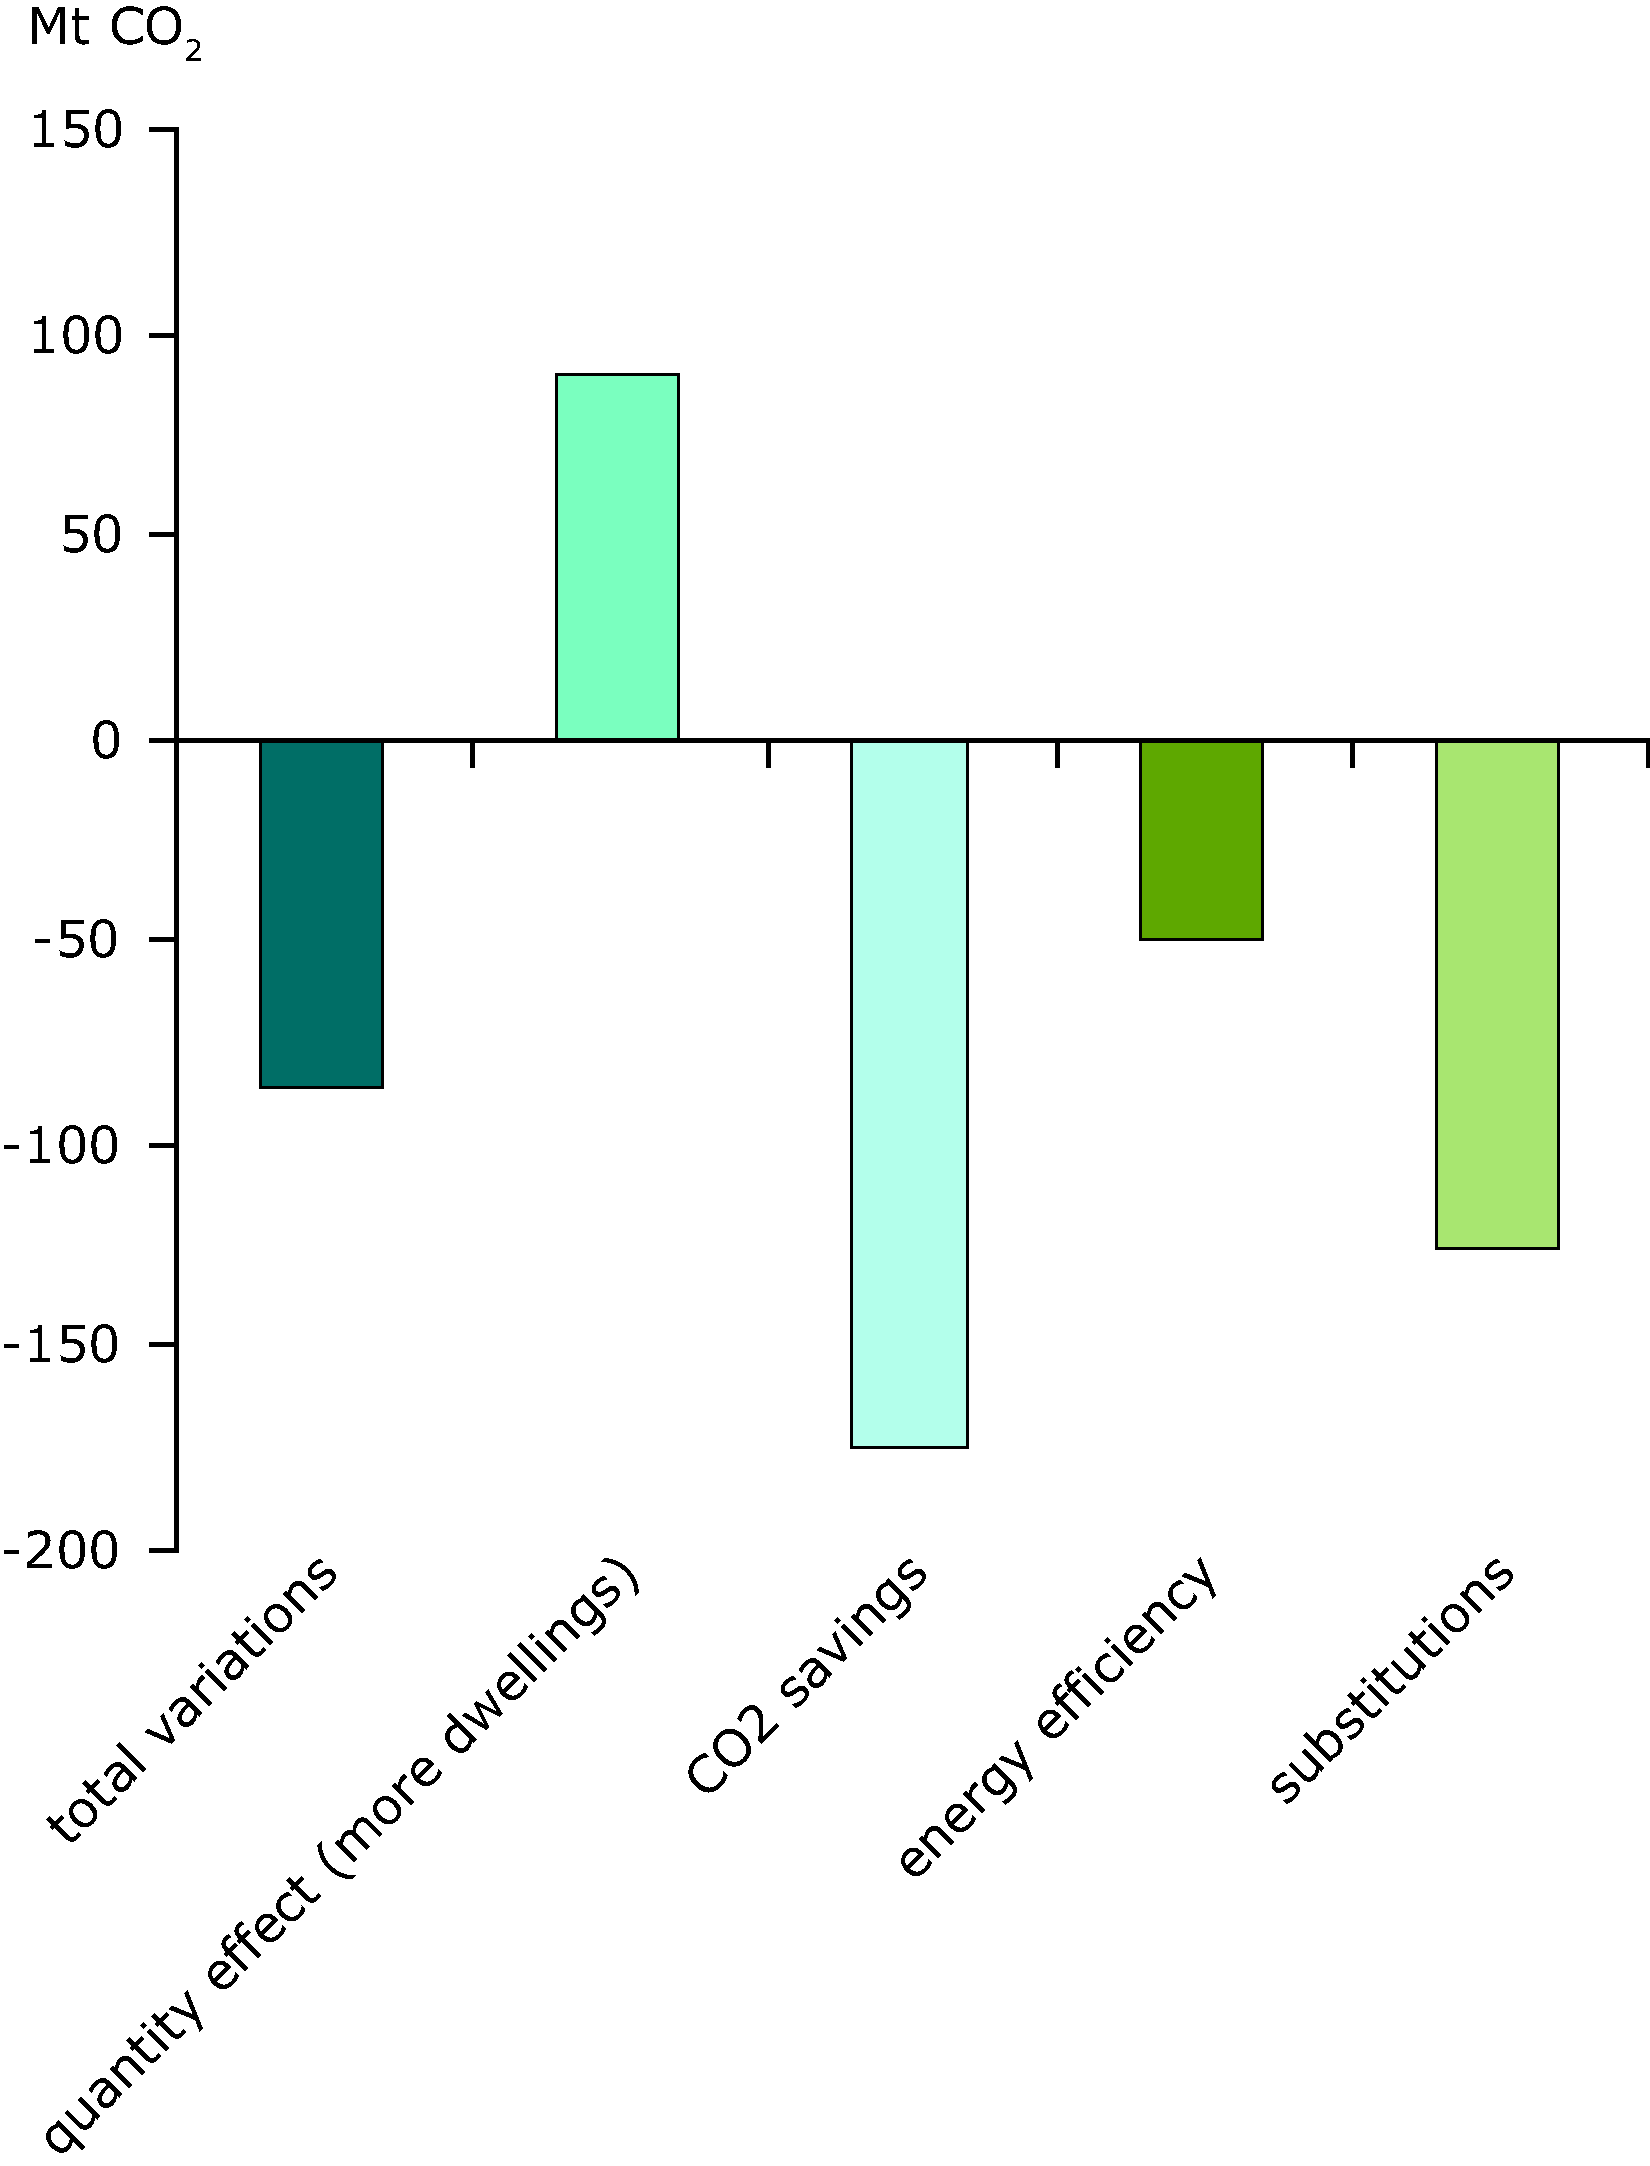 Variation in direct CO2 emission from household (EU27)